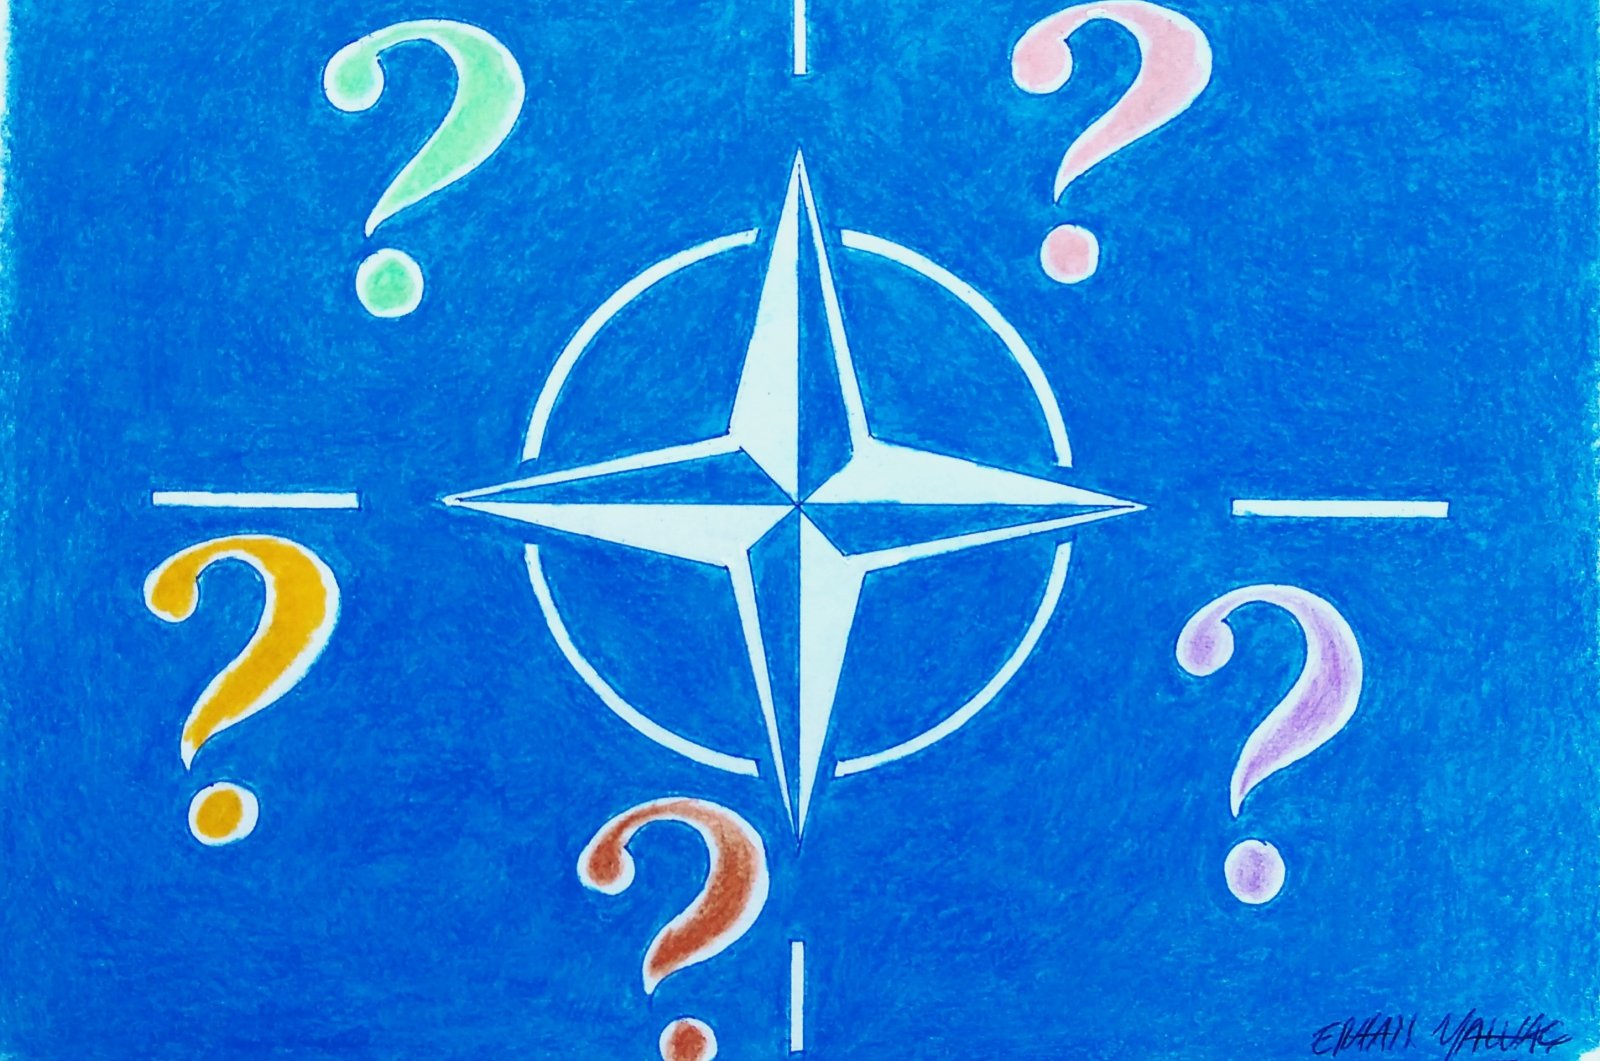 A series of debates will essentially clarify the future position of NATO in the global economic-political system. (Illustration by Erhan Yalvaç)